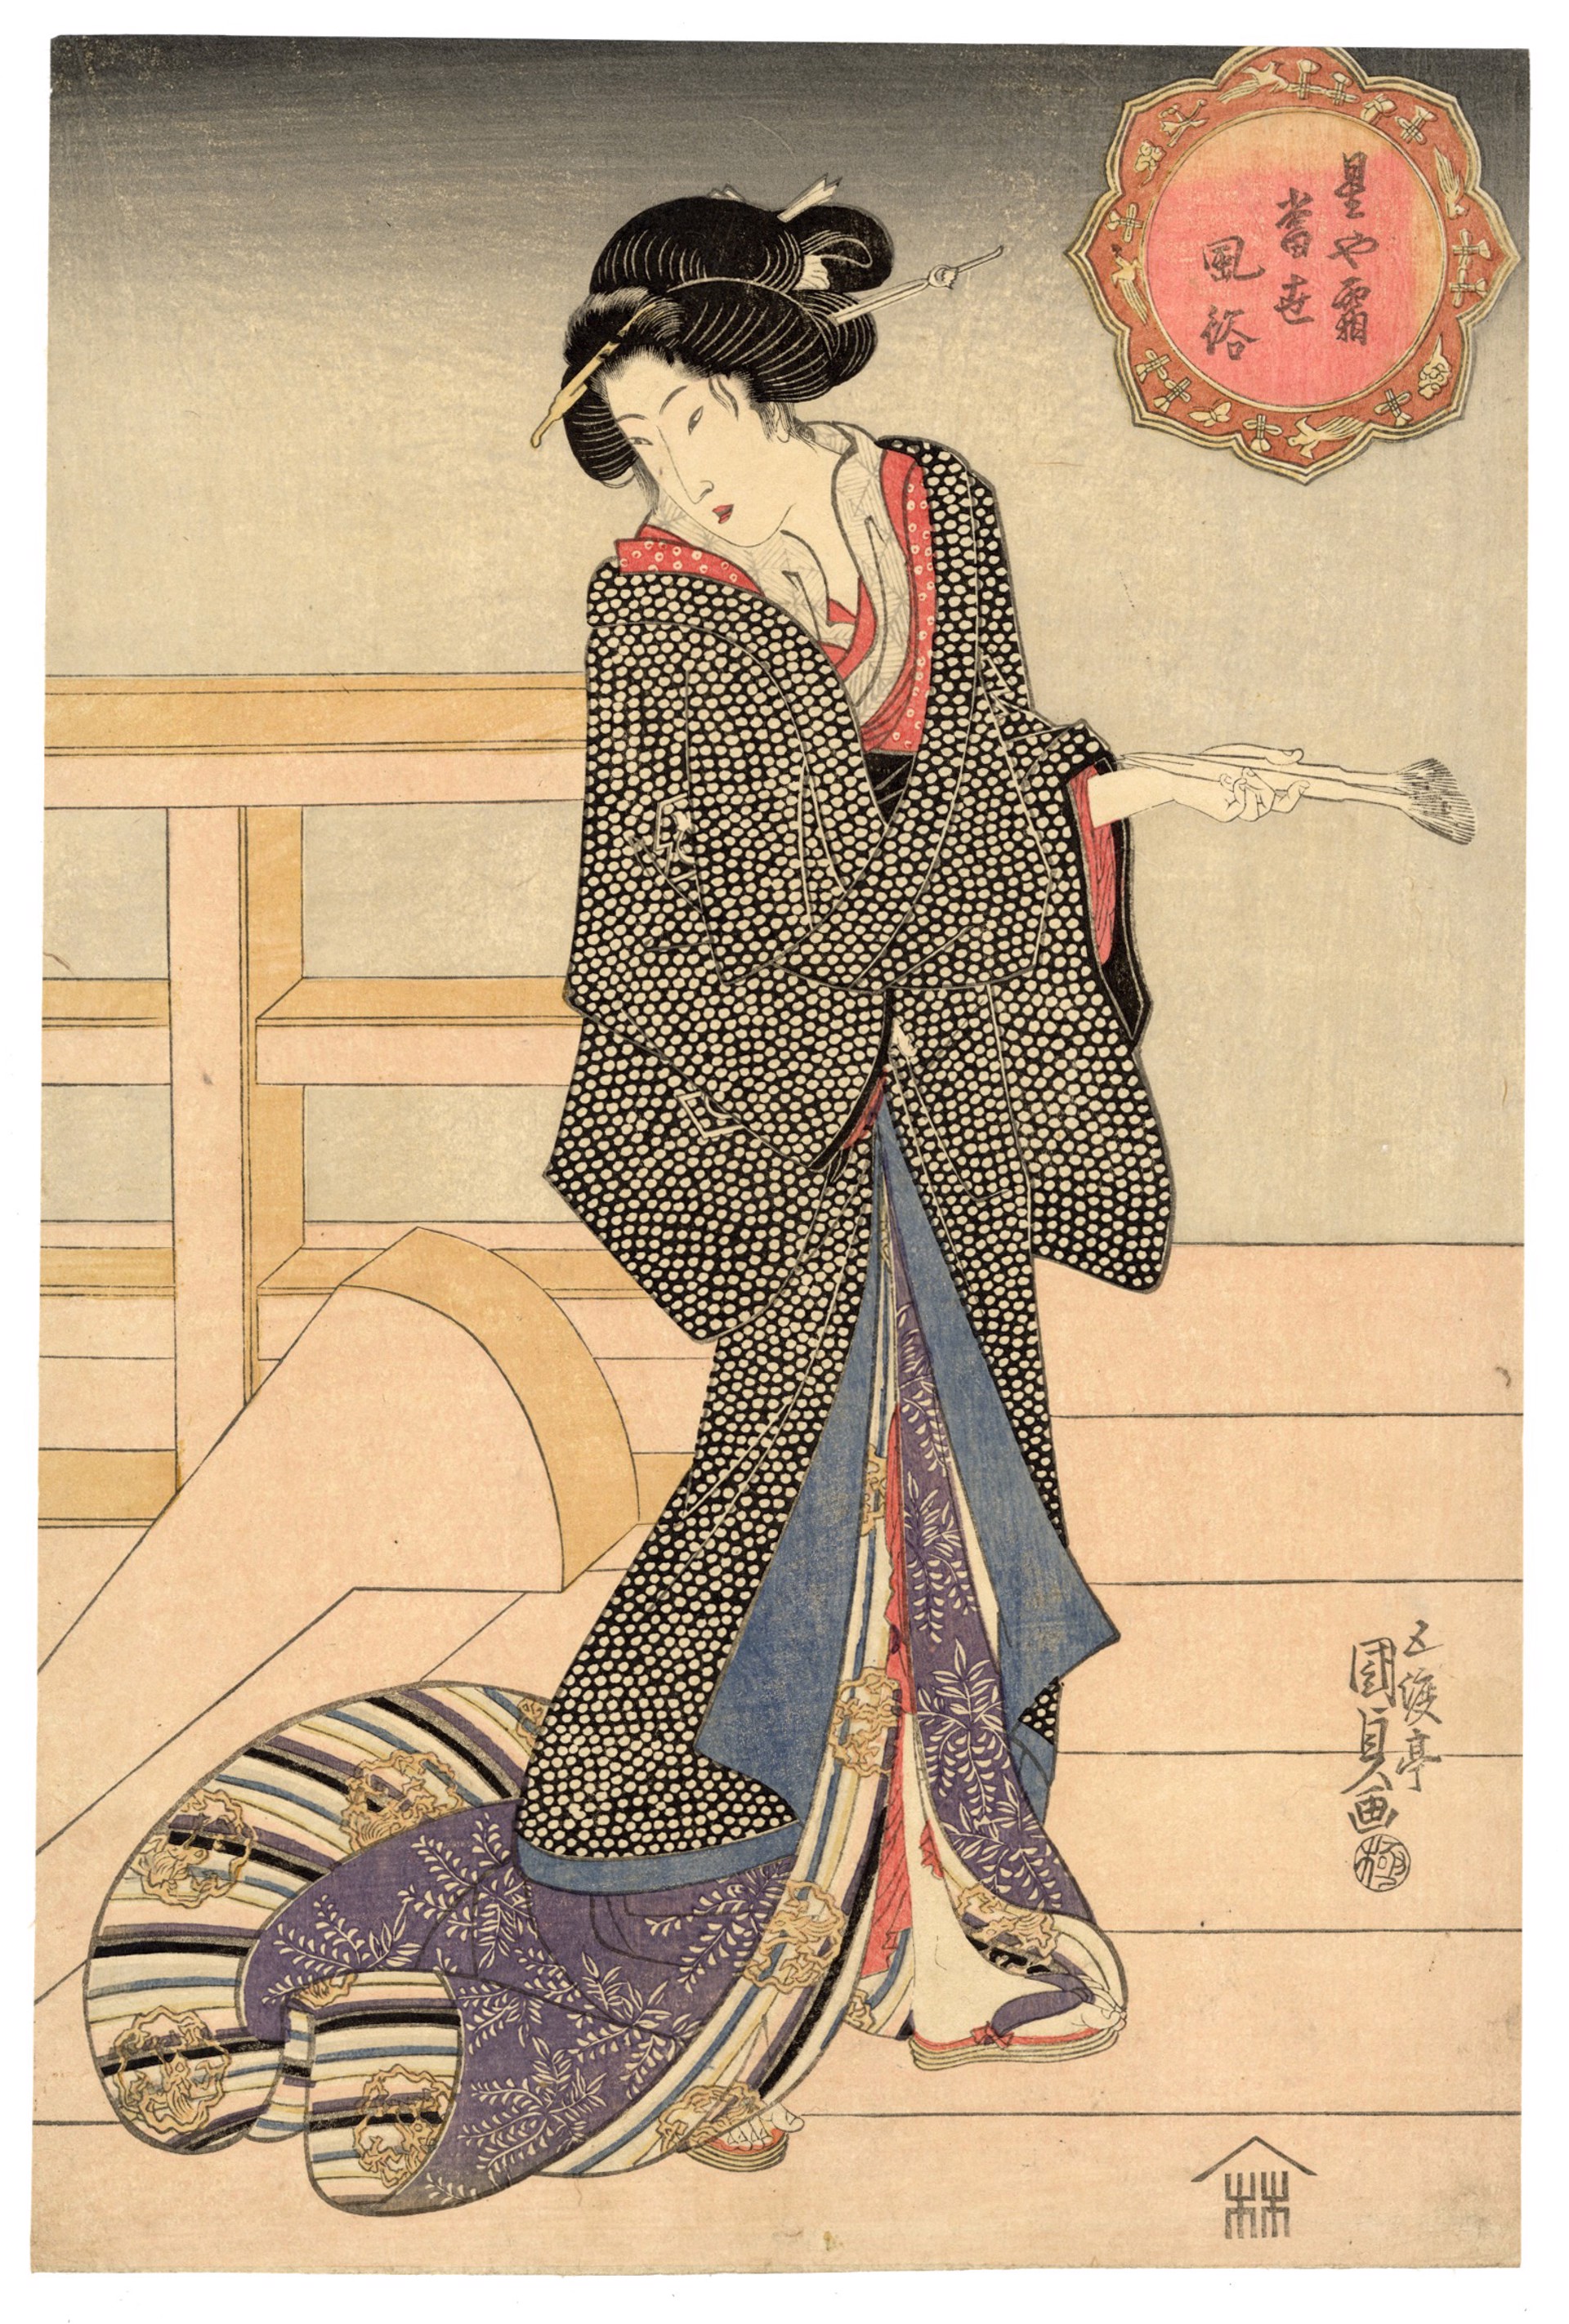 Bijin Holding Tooth Brushes by Kunisada